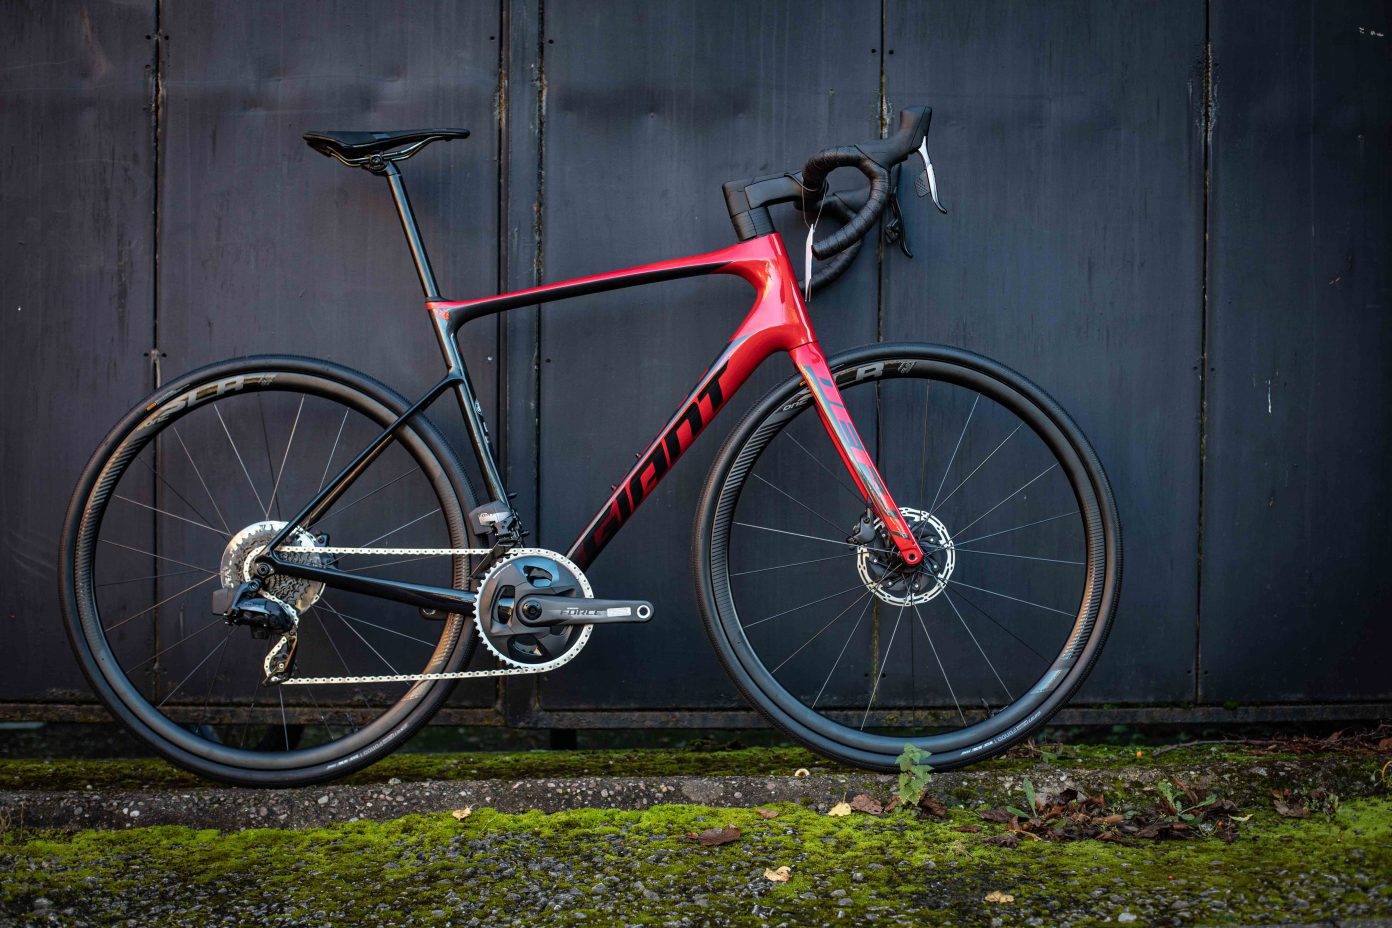 Giant Defy Advanced Pro 1 Force 2020 Review Cyclestore Blog